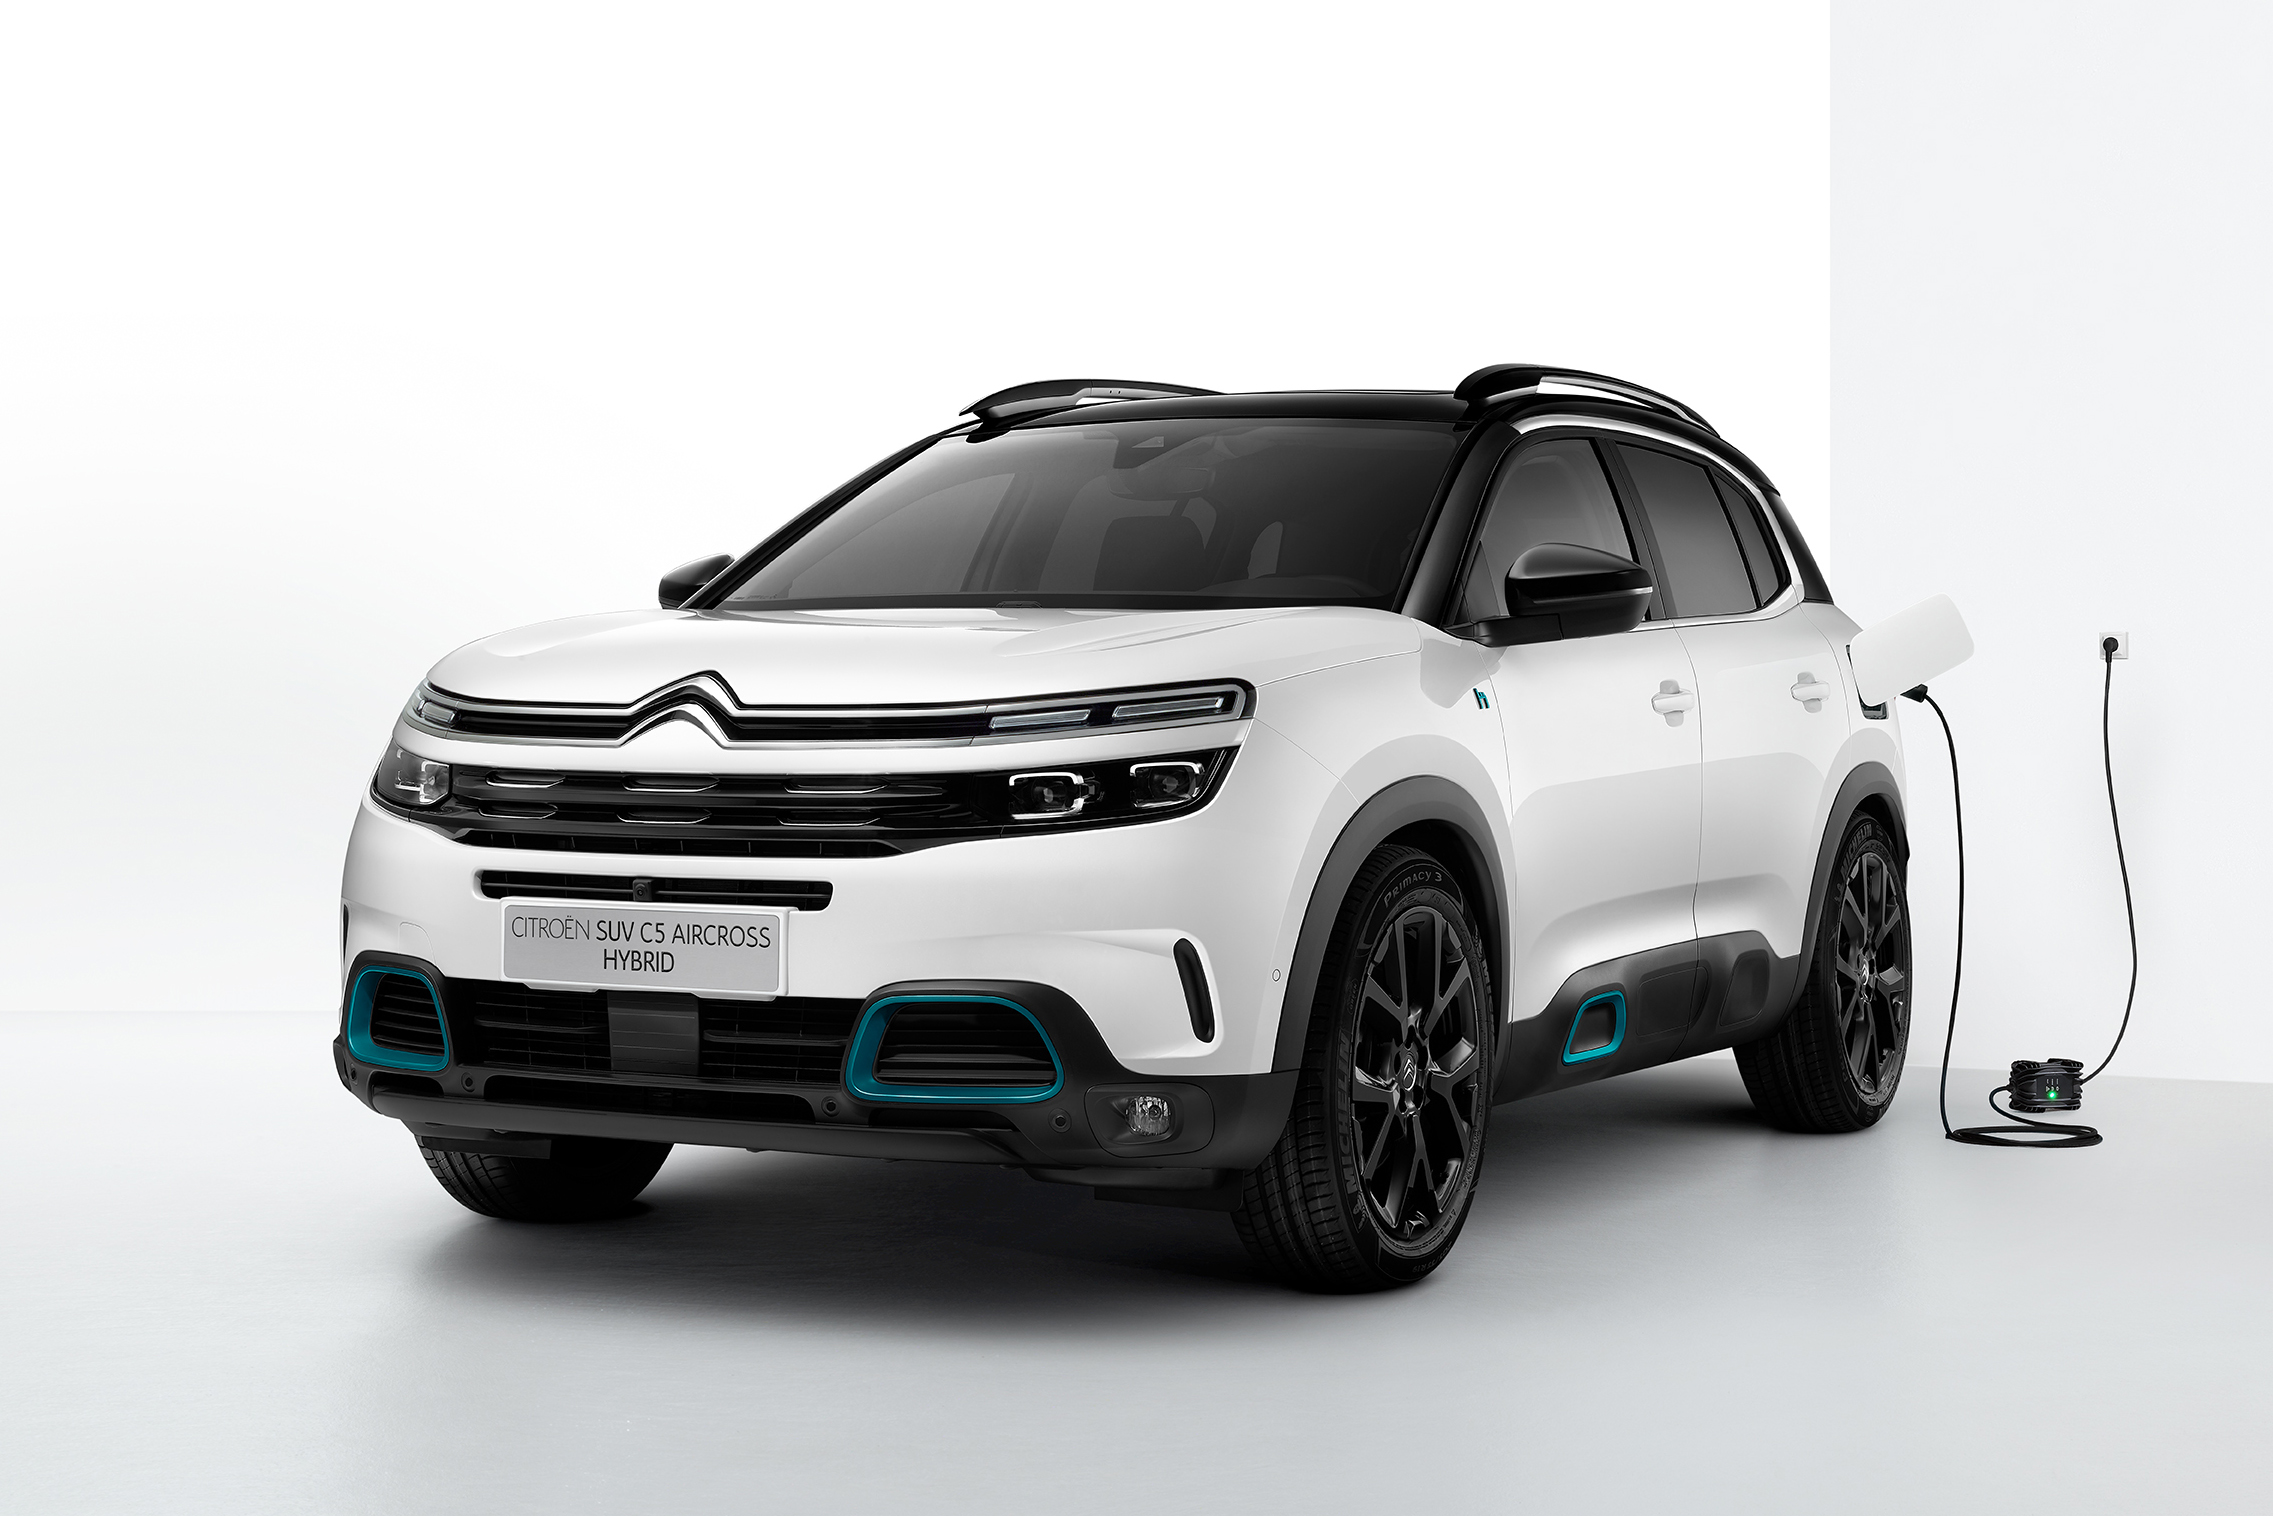 2020 Citroen C5 Aircross plug-in hybrid: prices, specs and 